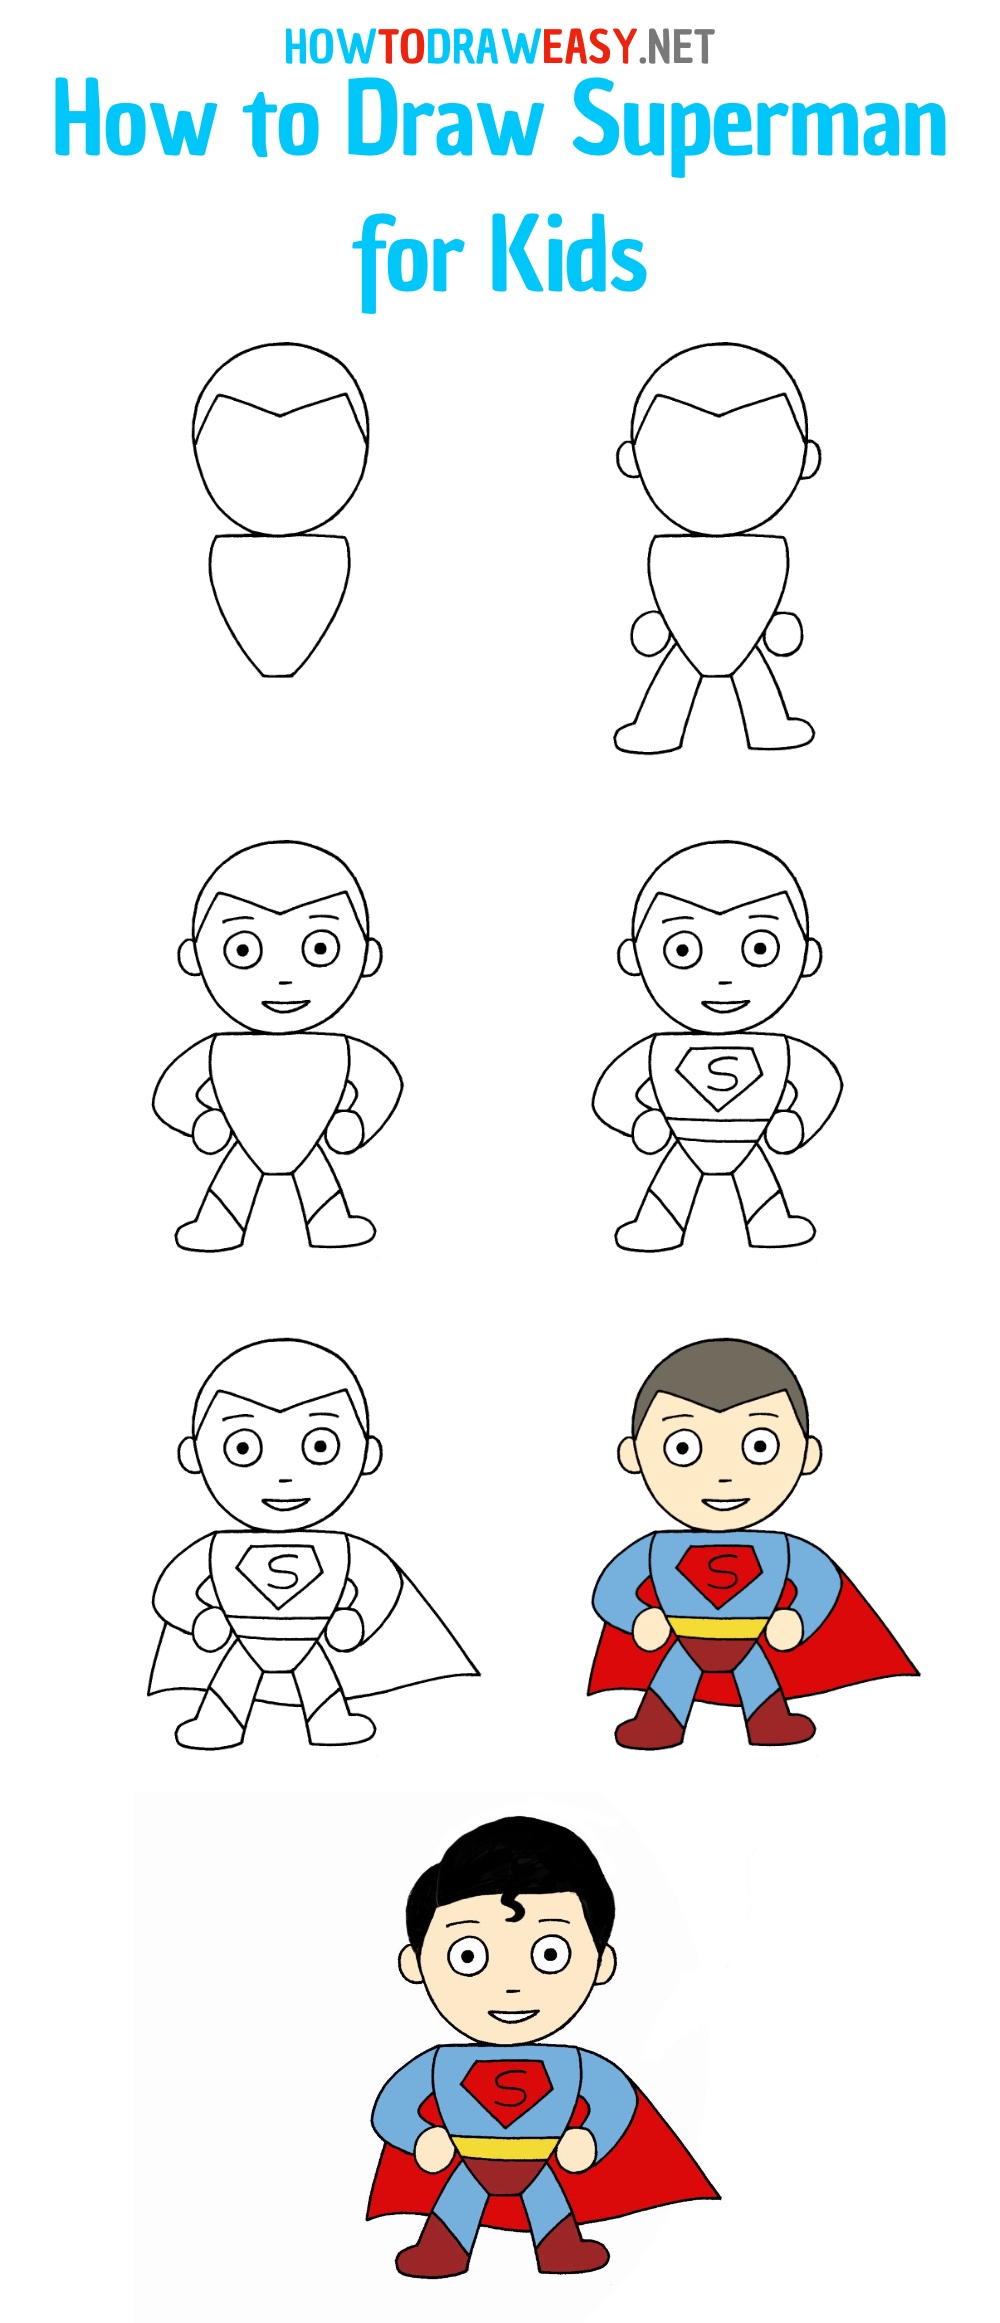 How to Draw Superman for Kids Step by Step